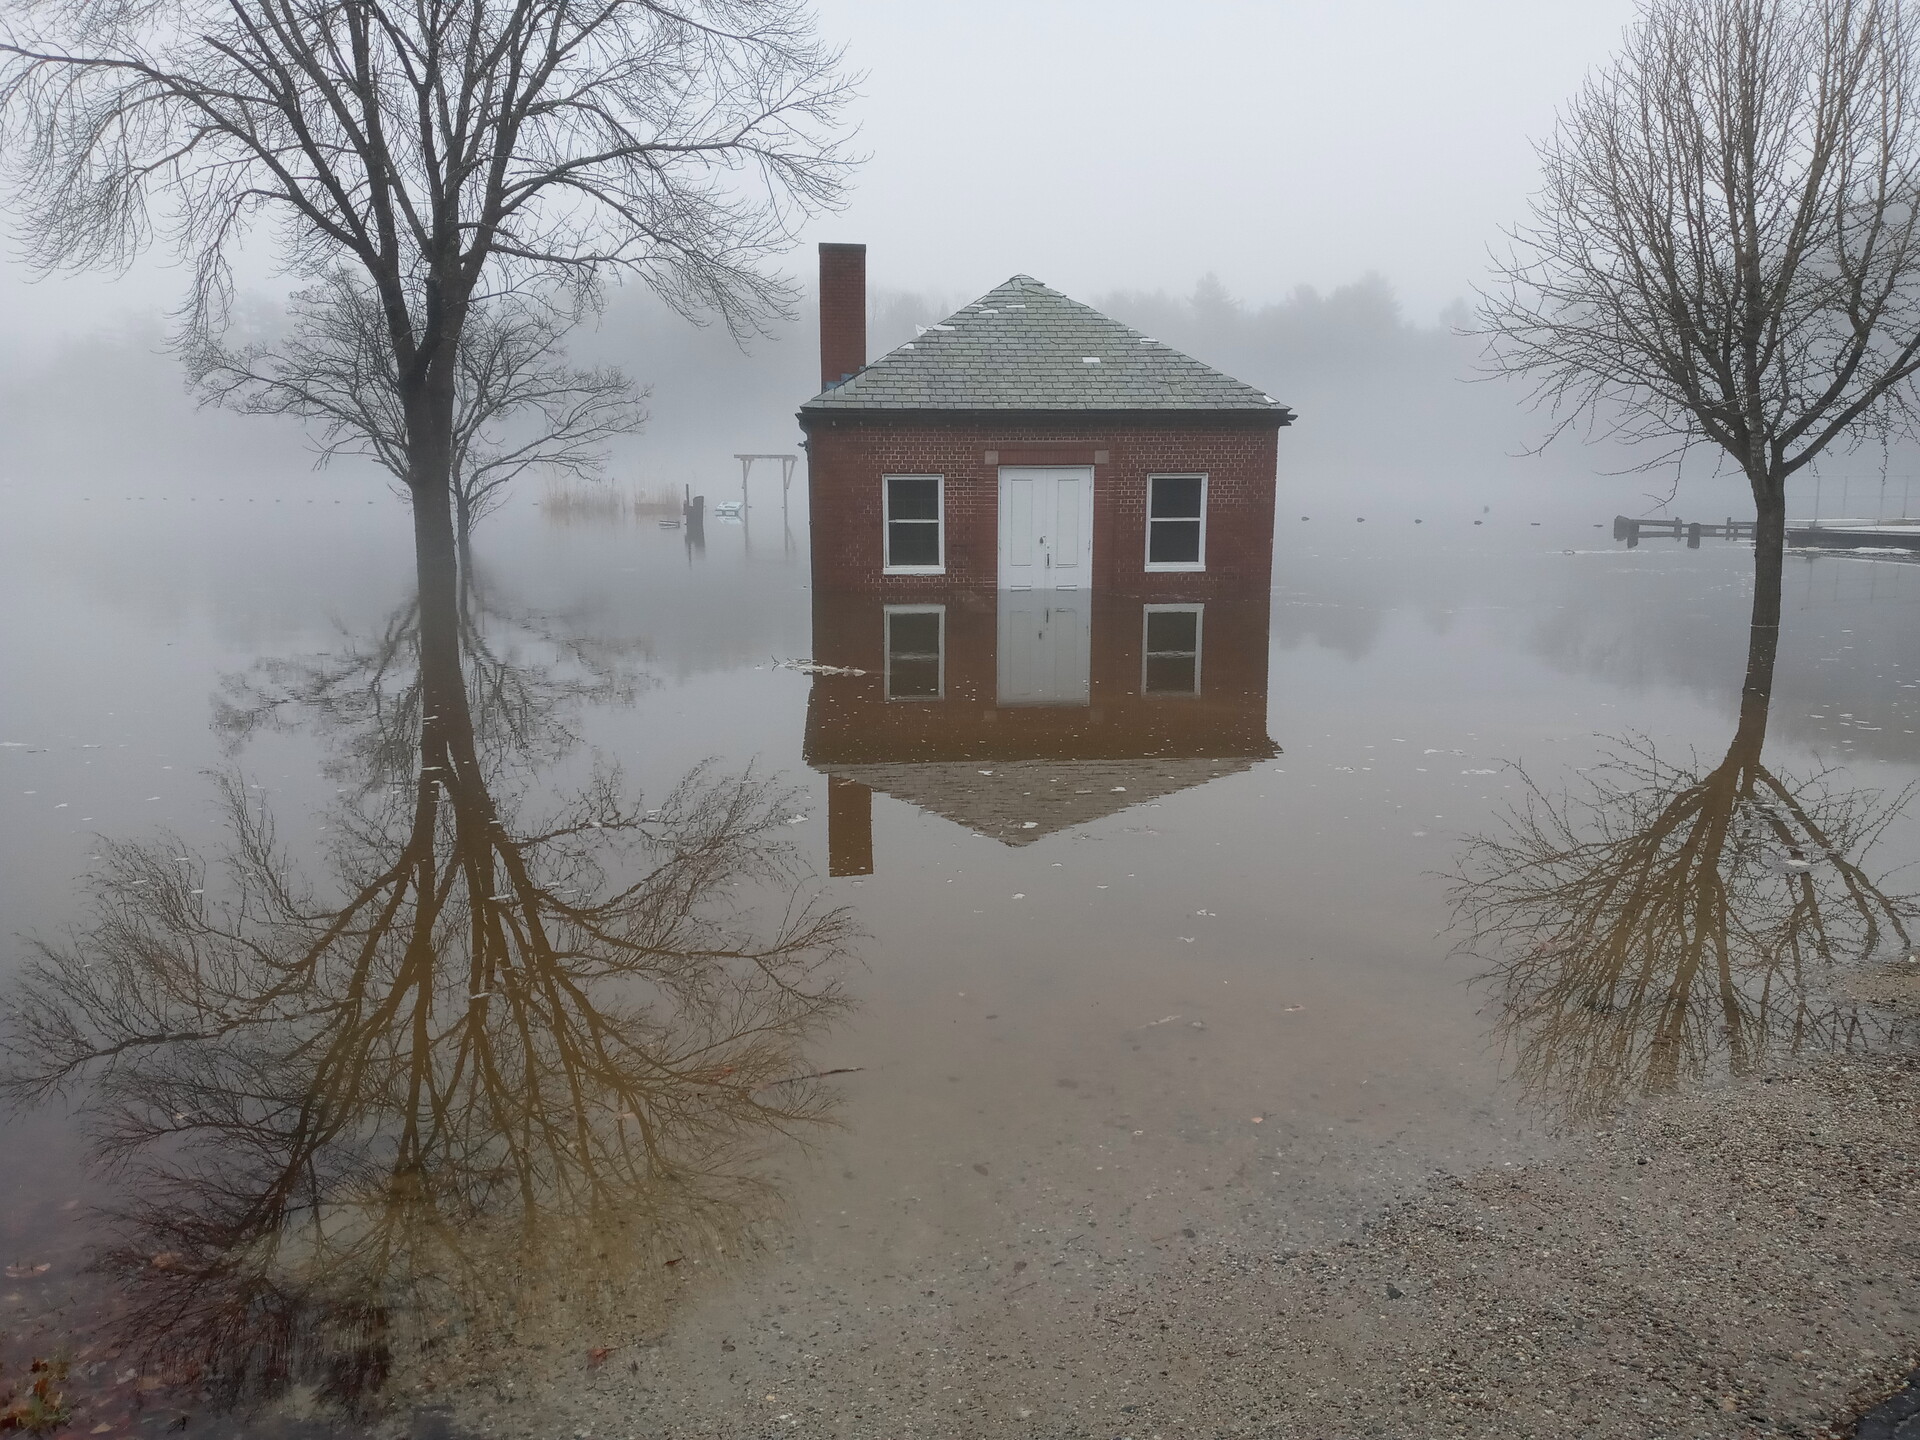 A foggy day. A small brick building is surrounding by flood water. Its reflection and that of a nearby tree are visible in the water.